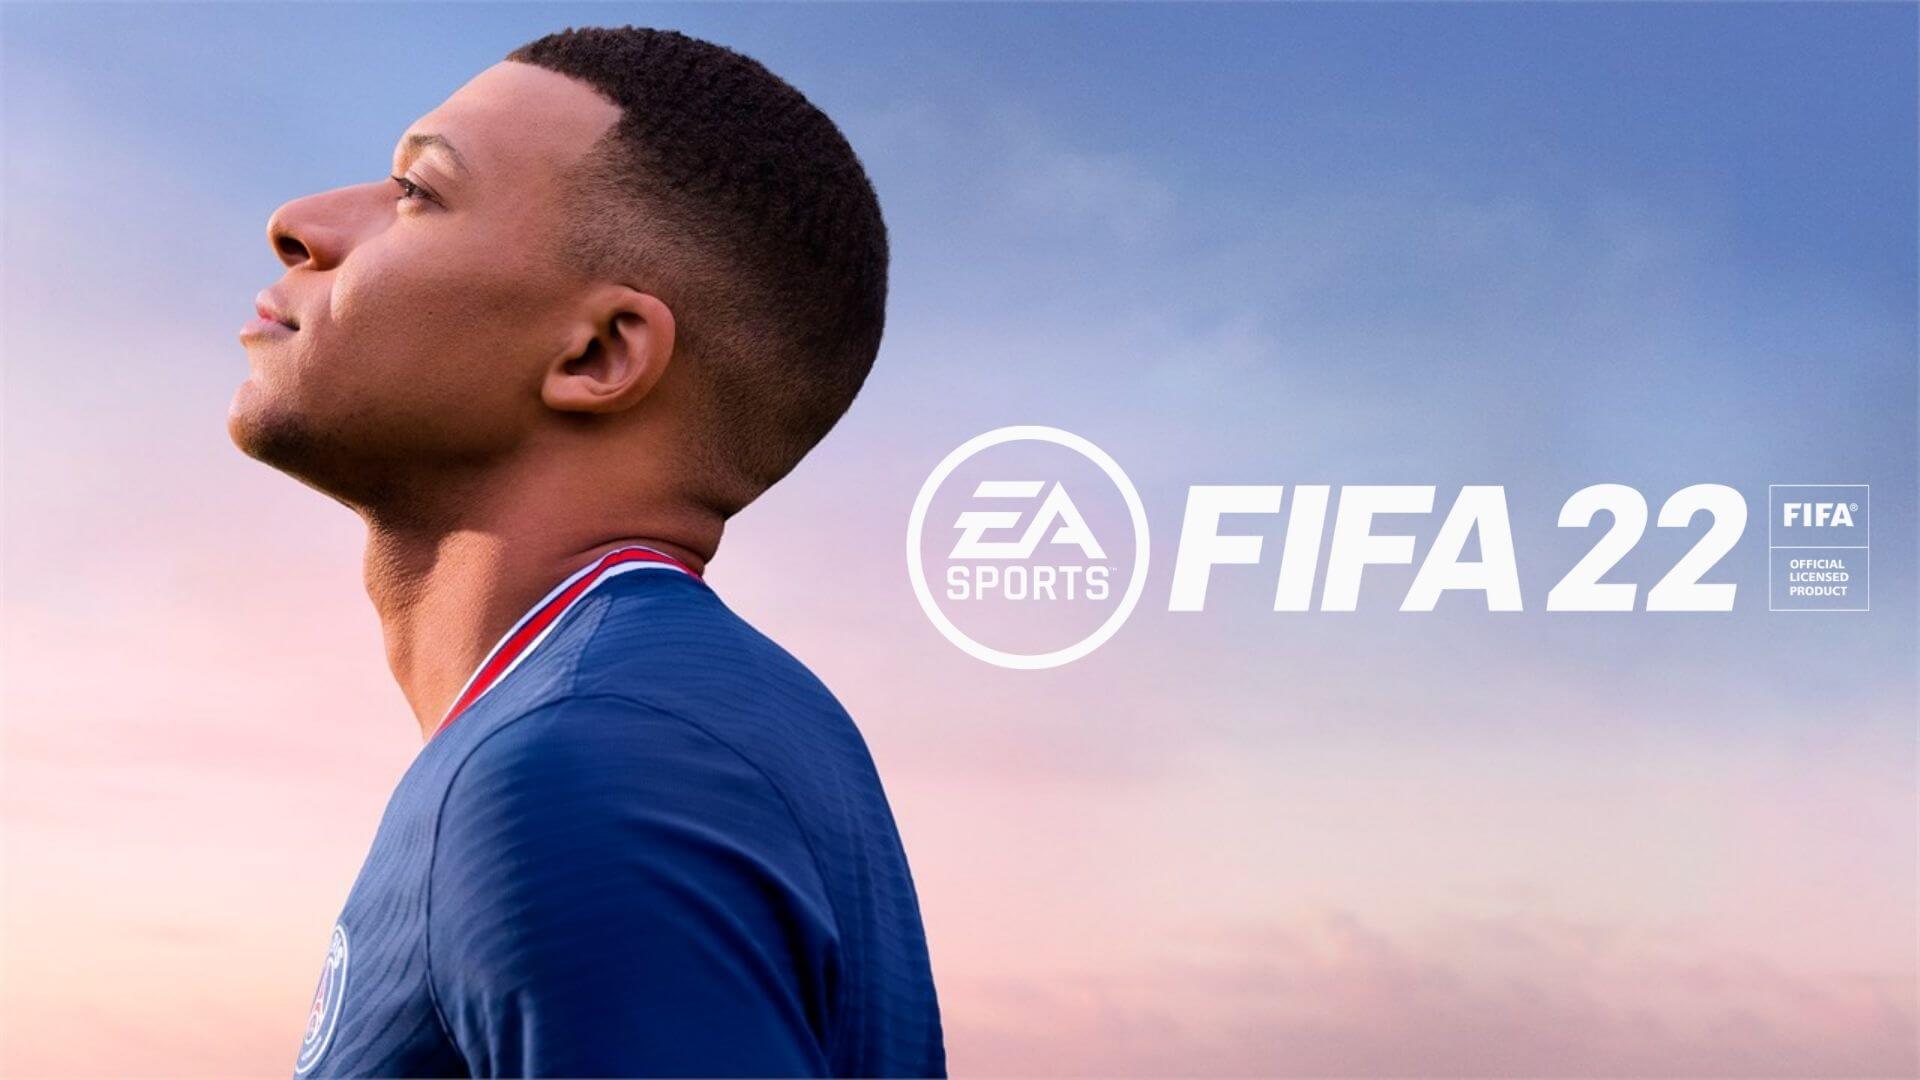 fifa 22 cover art with mbappe